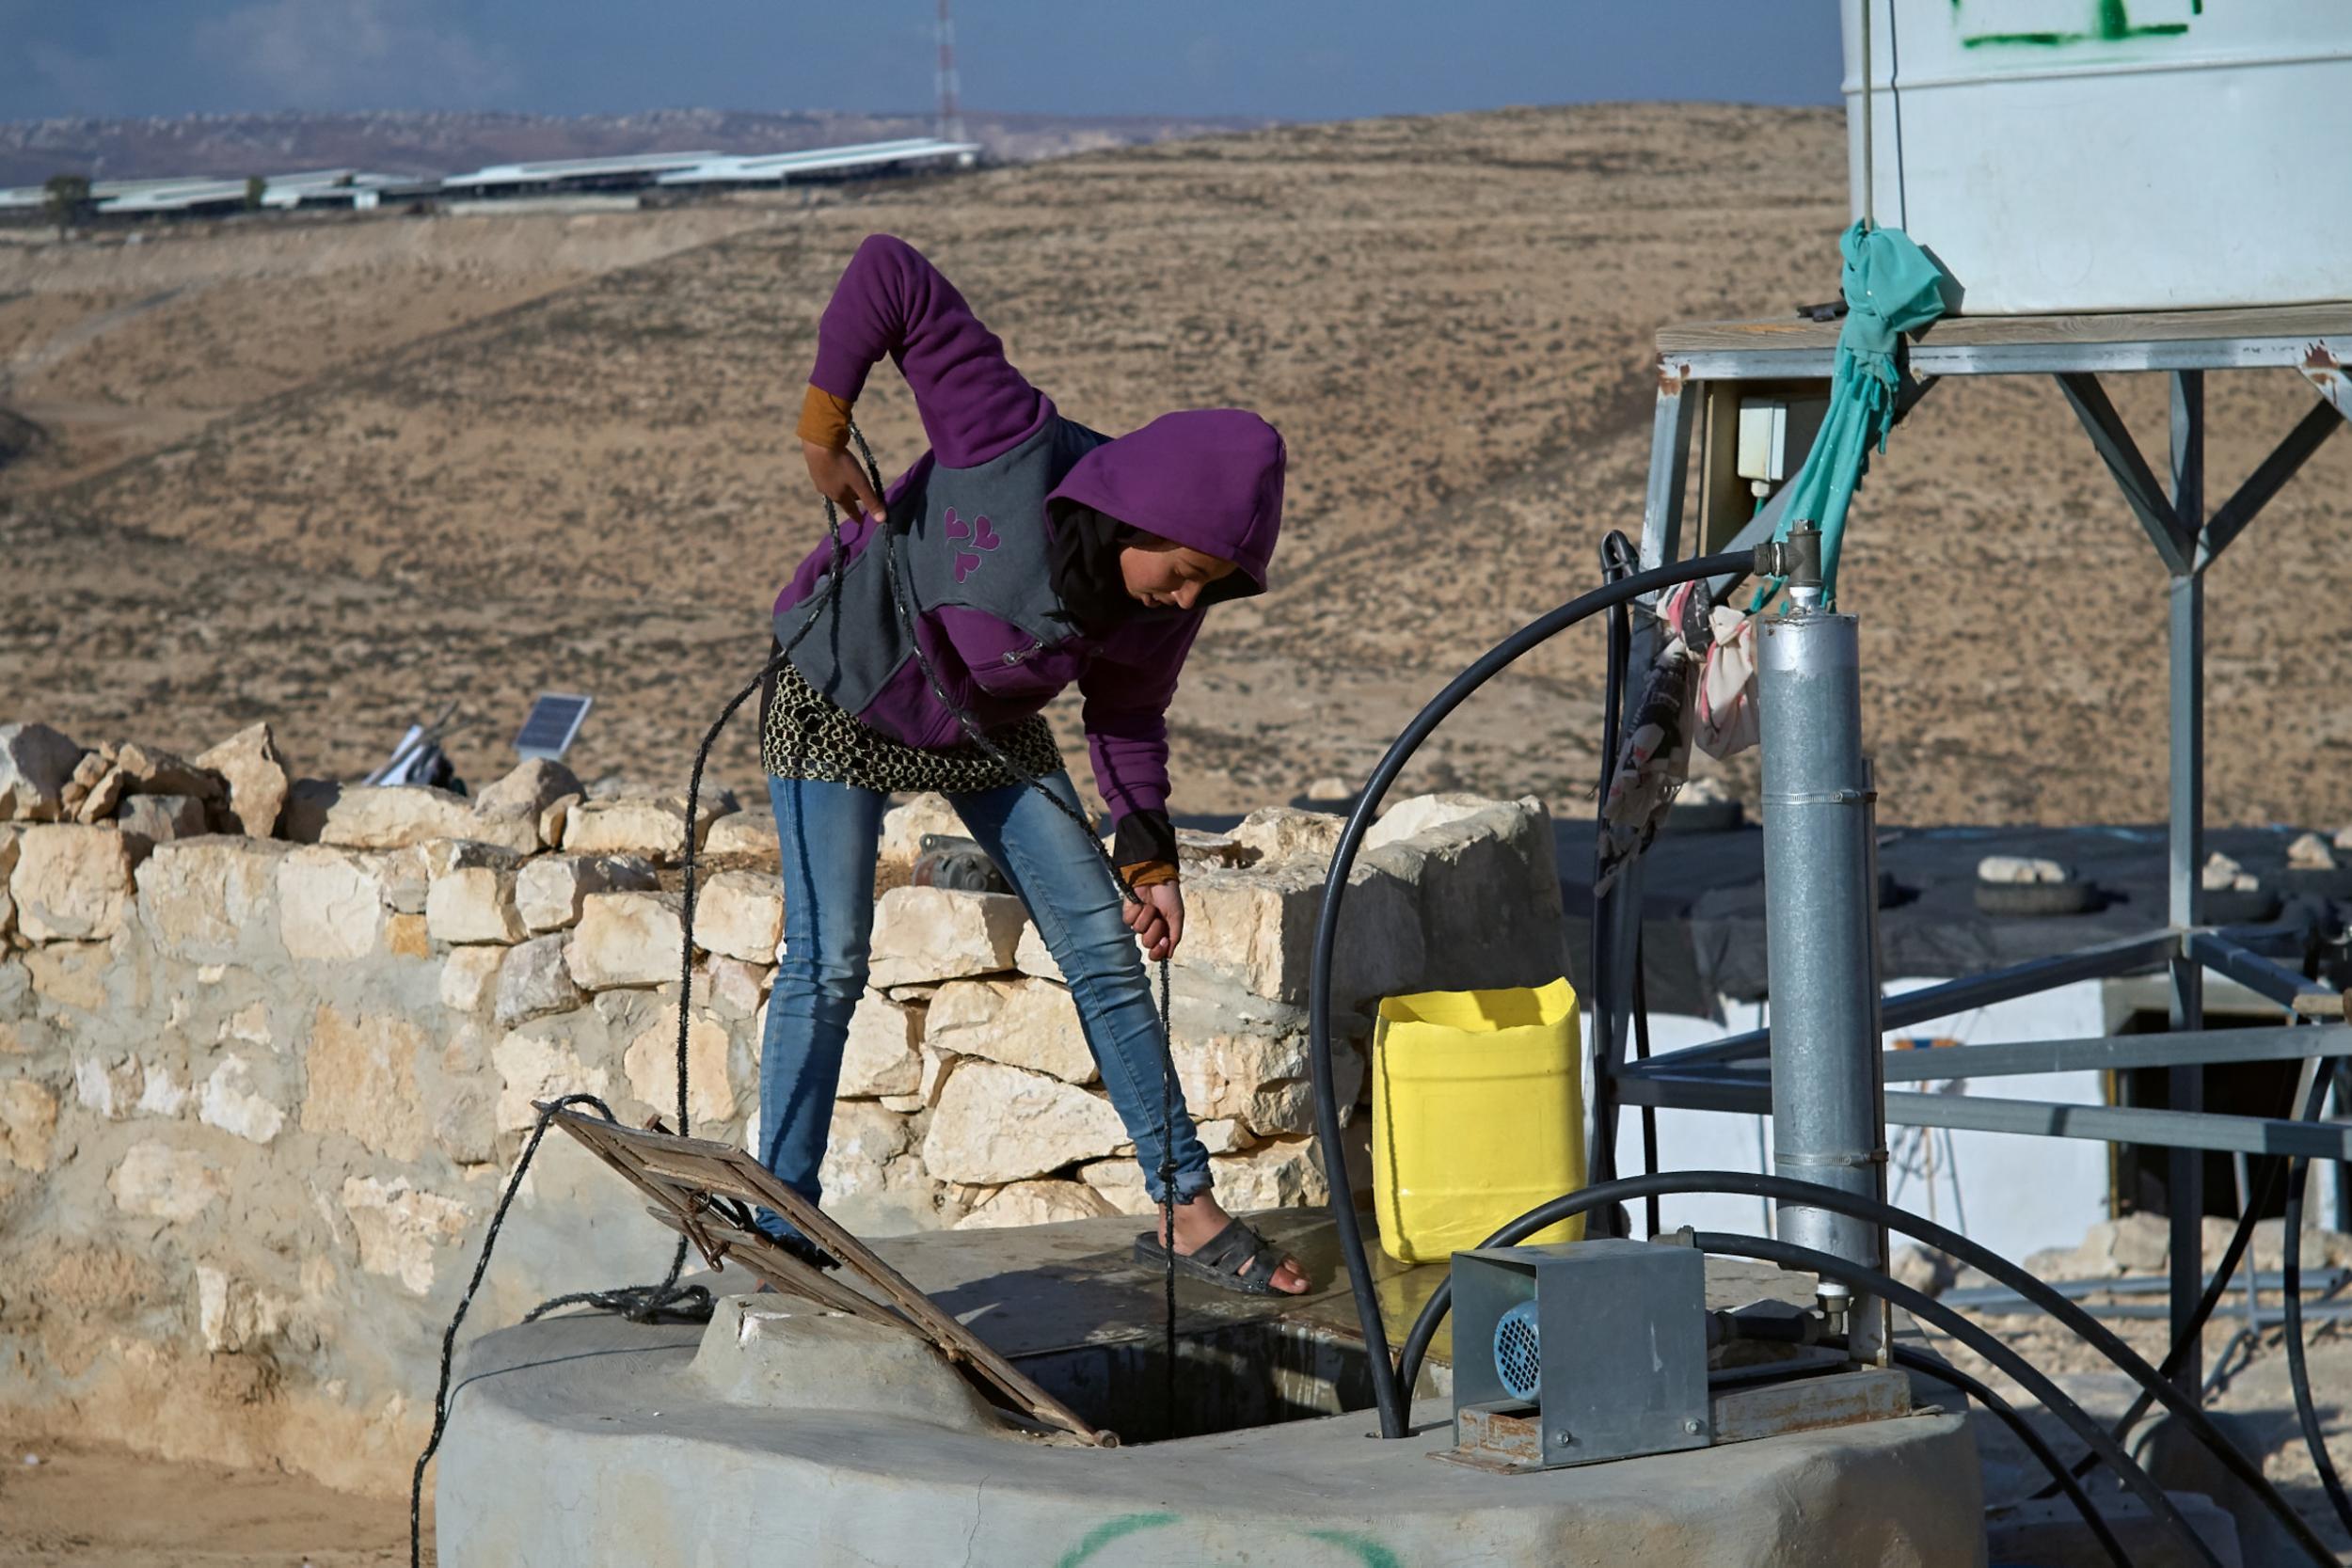 A woman draws water from a well in the Bedouin encampment of Susya – in the background is the Israeli settlement of Susya (Photo: Ben Toren)